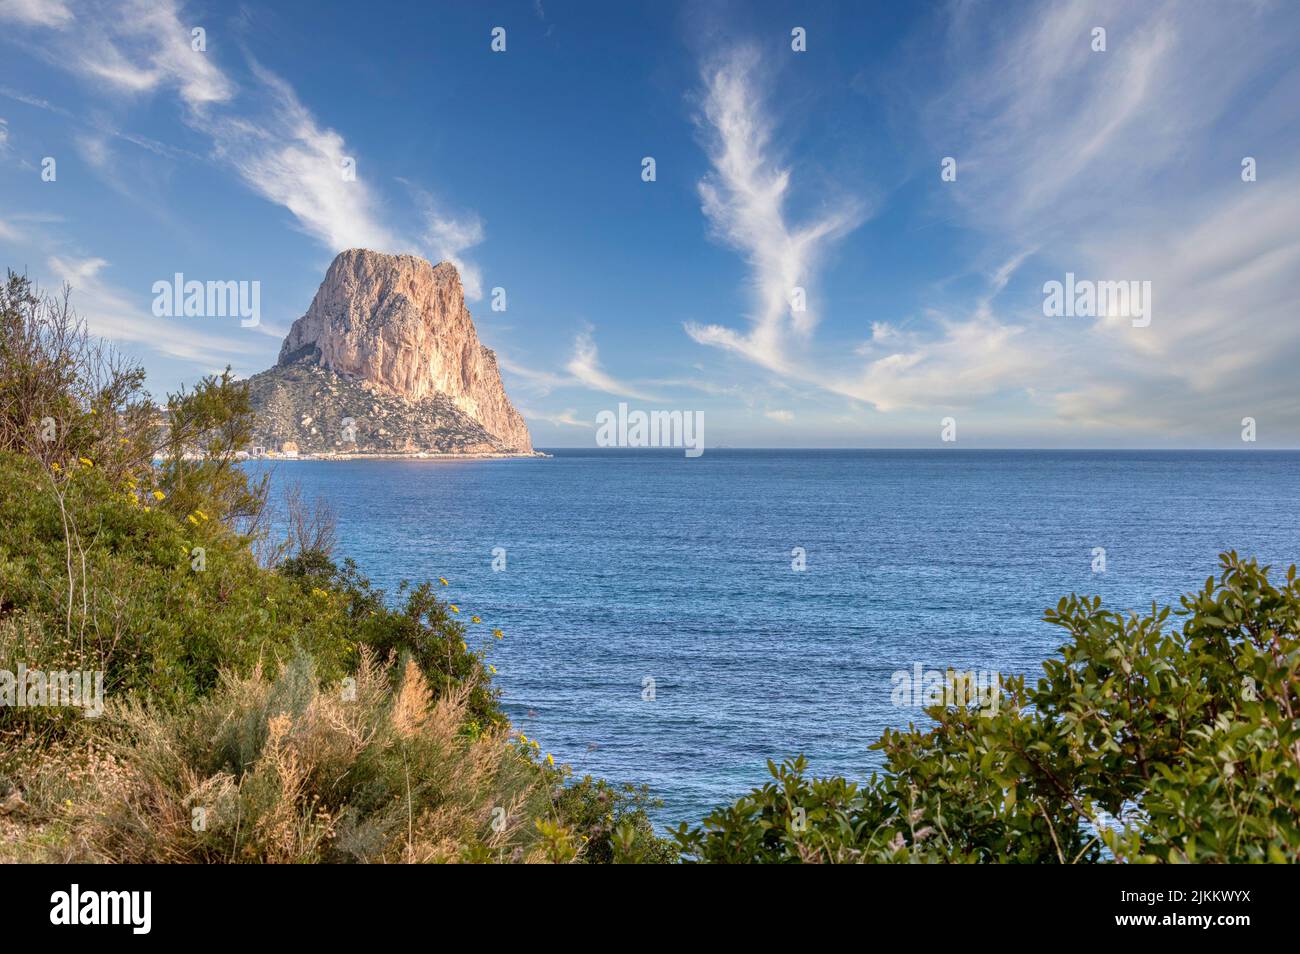 The Peñón de Ifach Natural Park is a Spanish protected natural area located in the municipality of Calpe, which is part of the province of Alicante, i Stock Photo